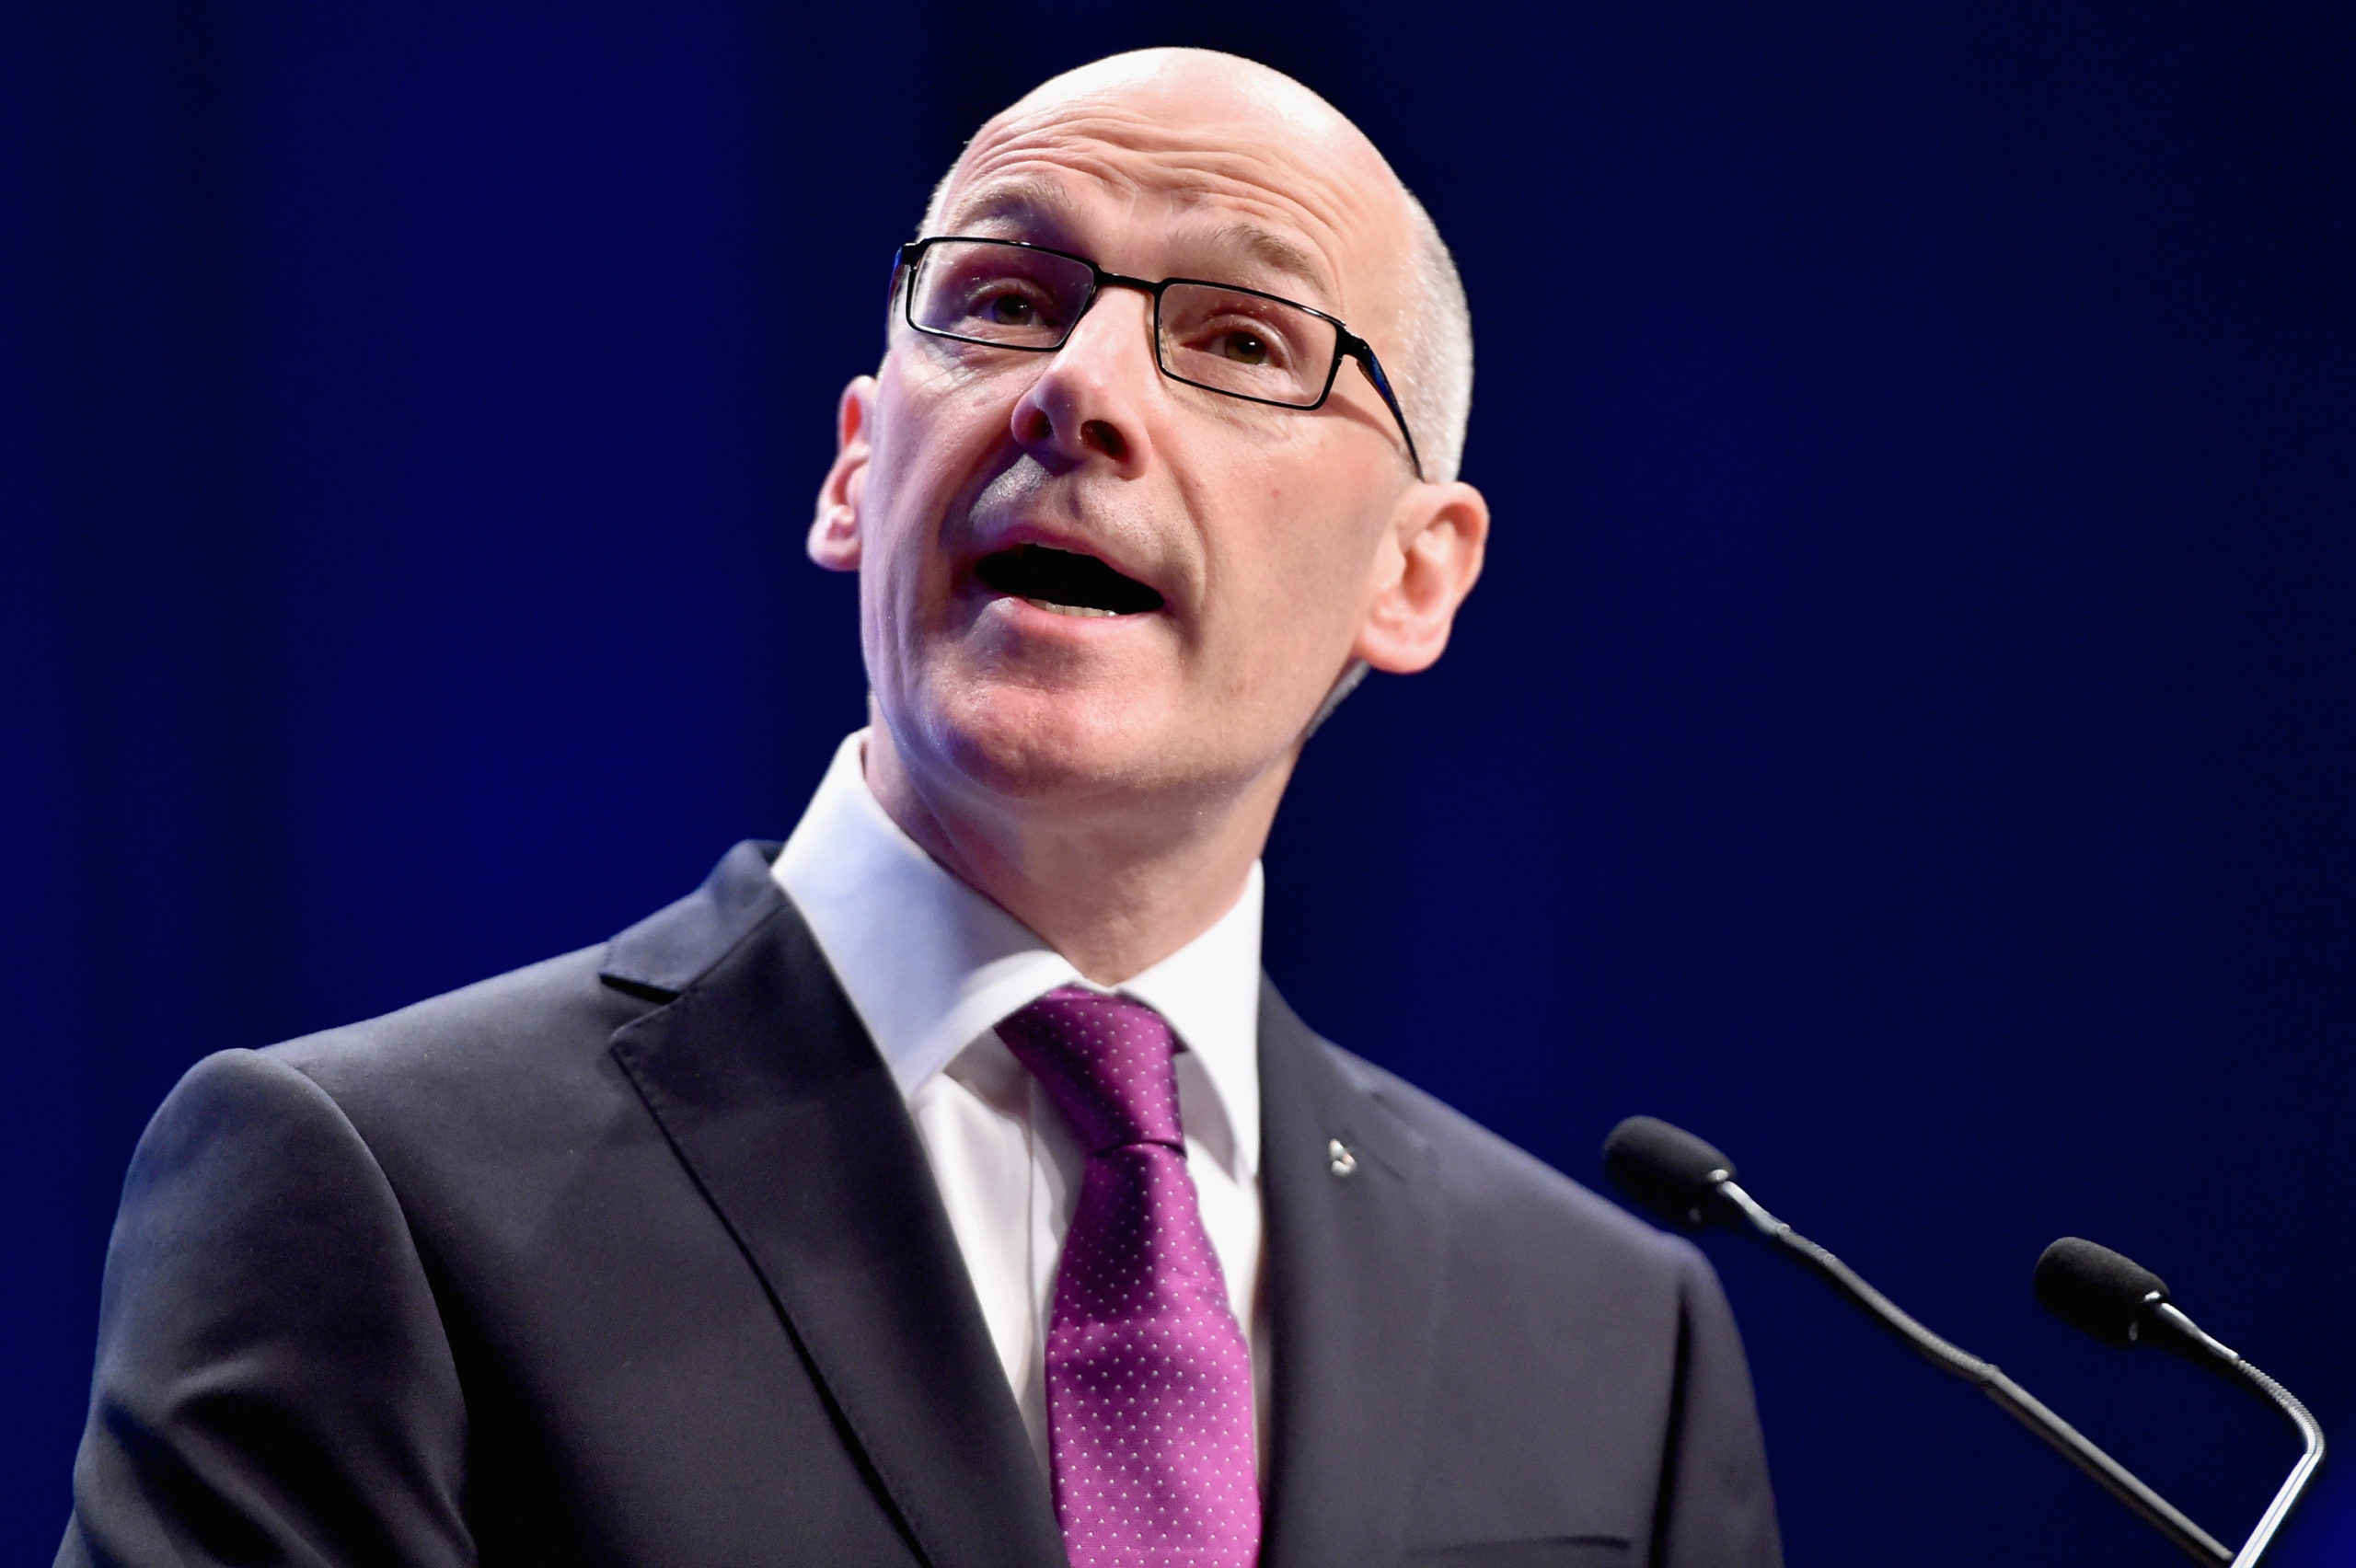 John Swinney issued a warning to parents ahead of the return.